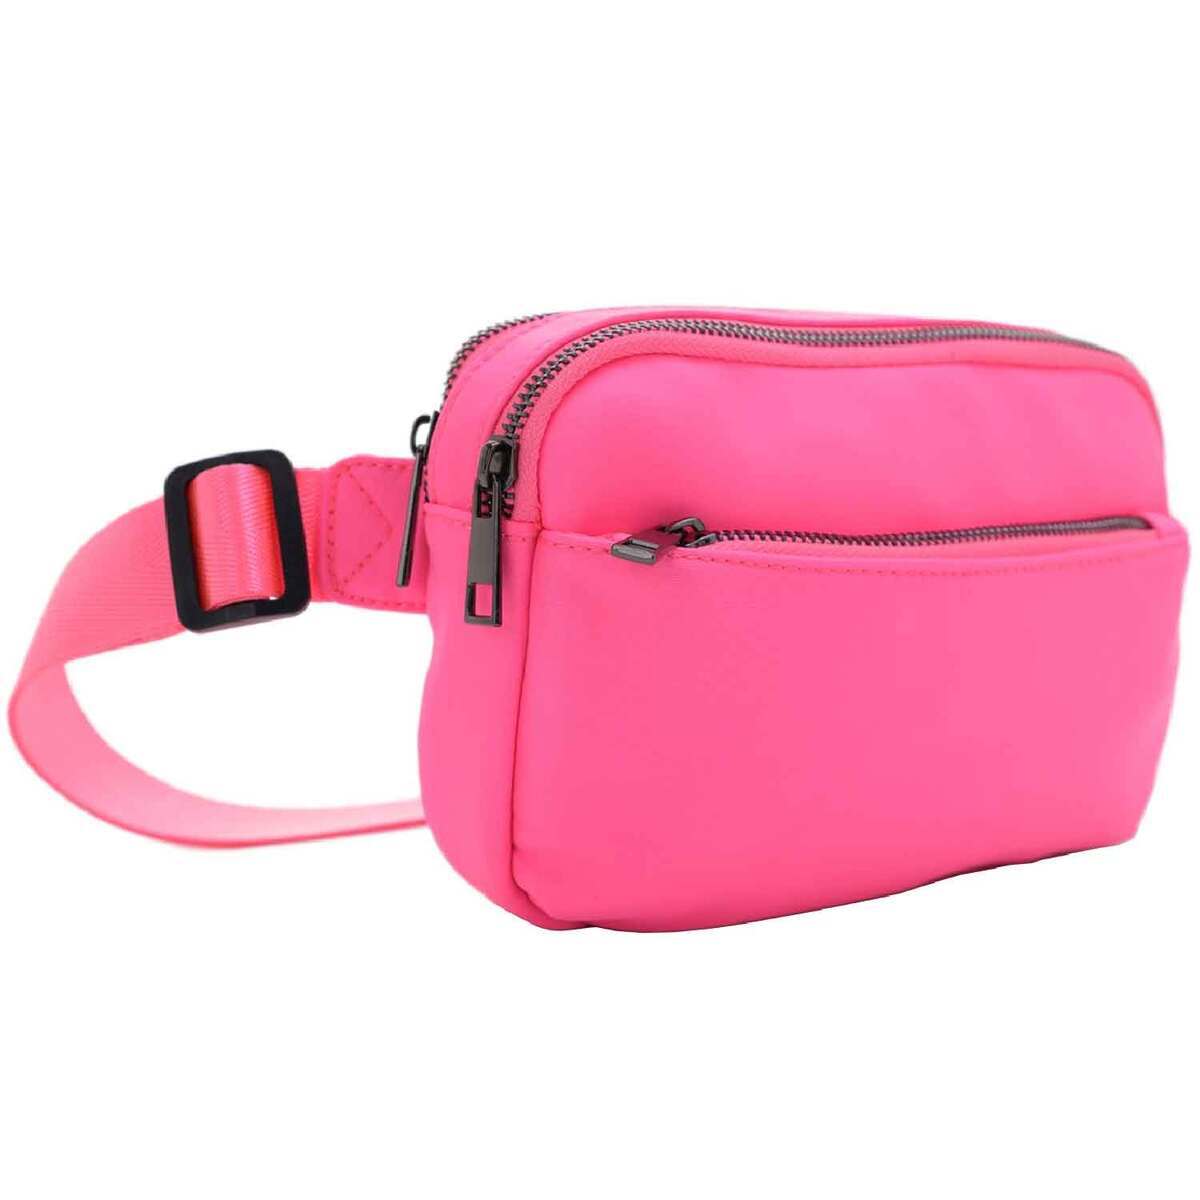 Jessie and James Waimea Nylon, Conceal Carry, Fanny Pack Neon Pink